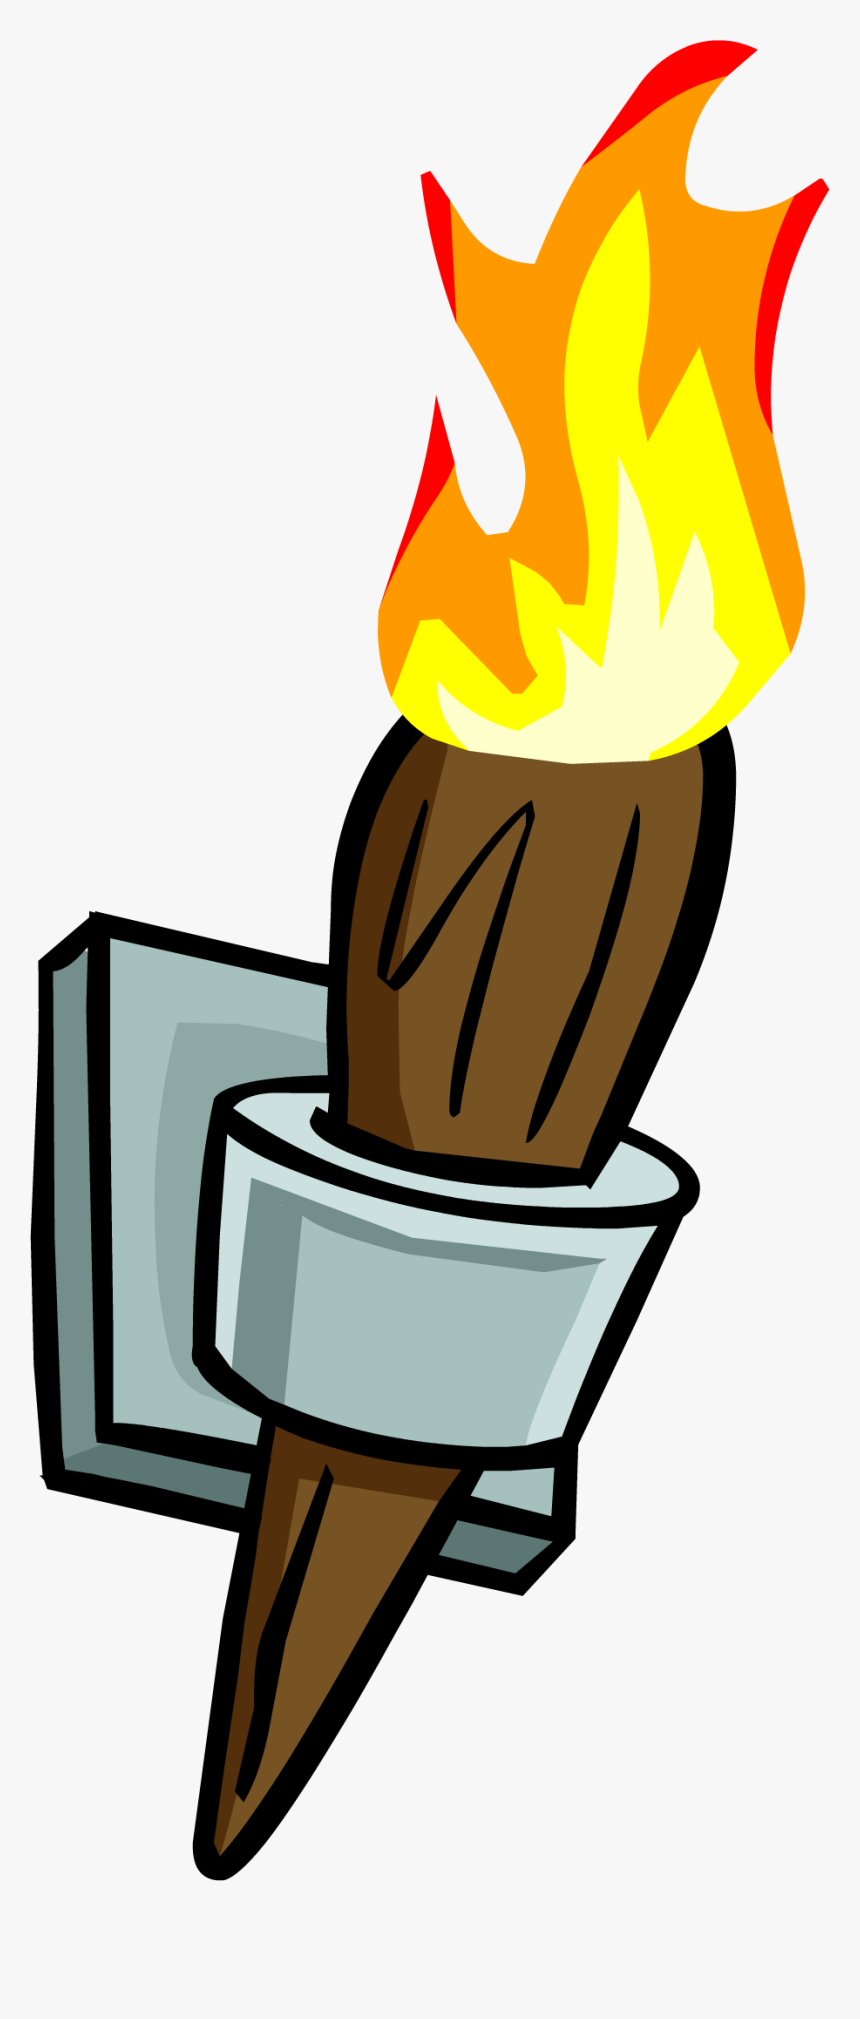 Wall Torch Clipart Clip Arts - Wall Torch Cartoon, HD Png Download, Free Download